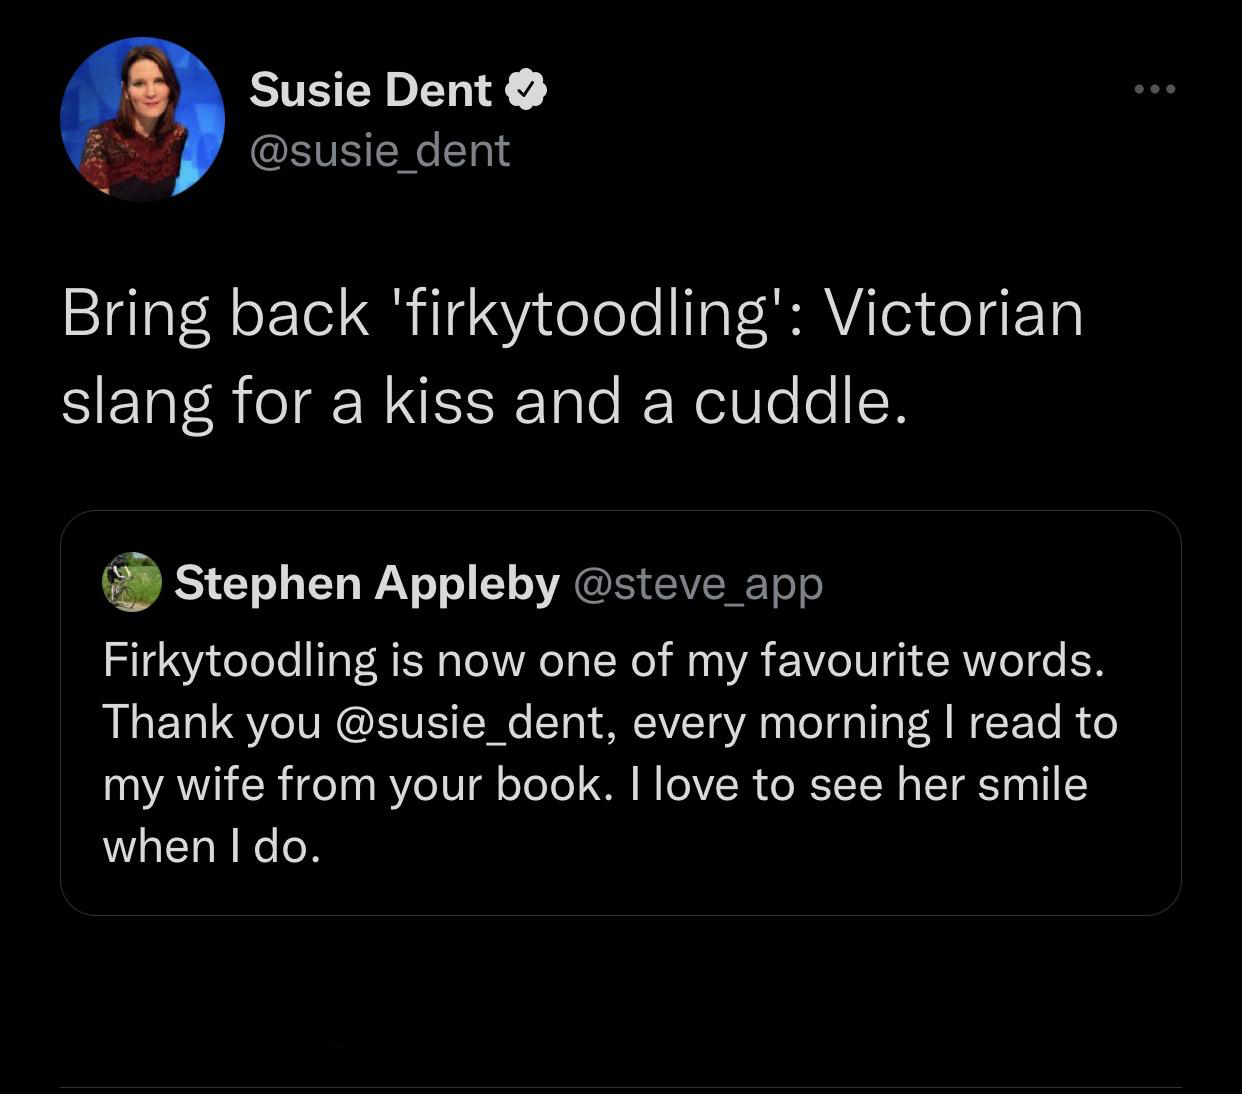 funny tweets and twitter memes - screenshot - Susie Dent dent Bring back 'firkytoodling' Victorian slang for a kiss and a cuddle. Stephen Appleby Firkytoodling is now one of my favourite words. Thank you , every morning I read to my wife from your book. I